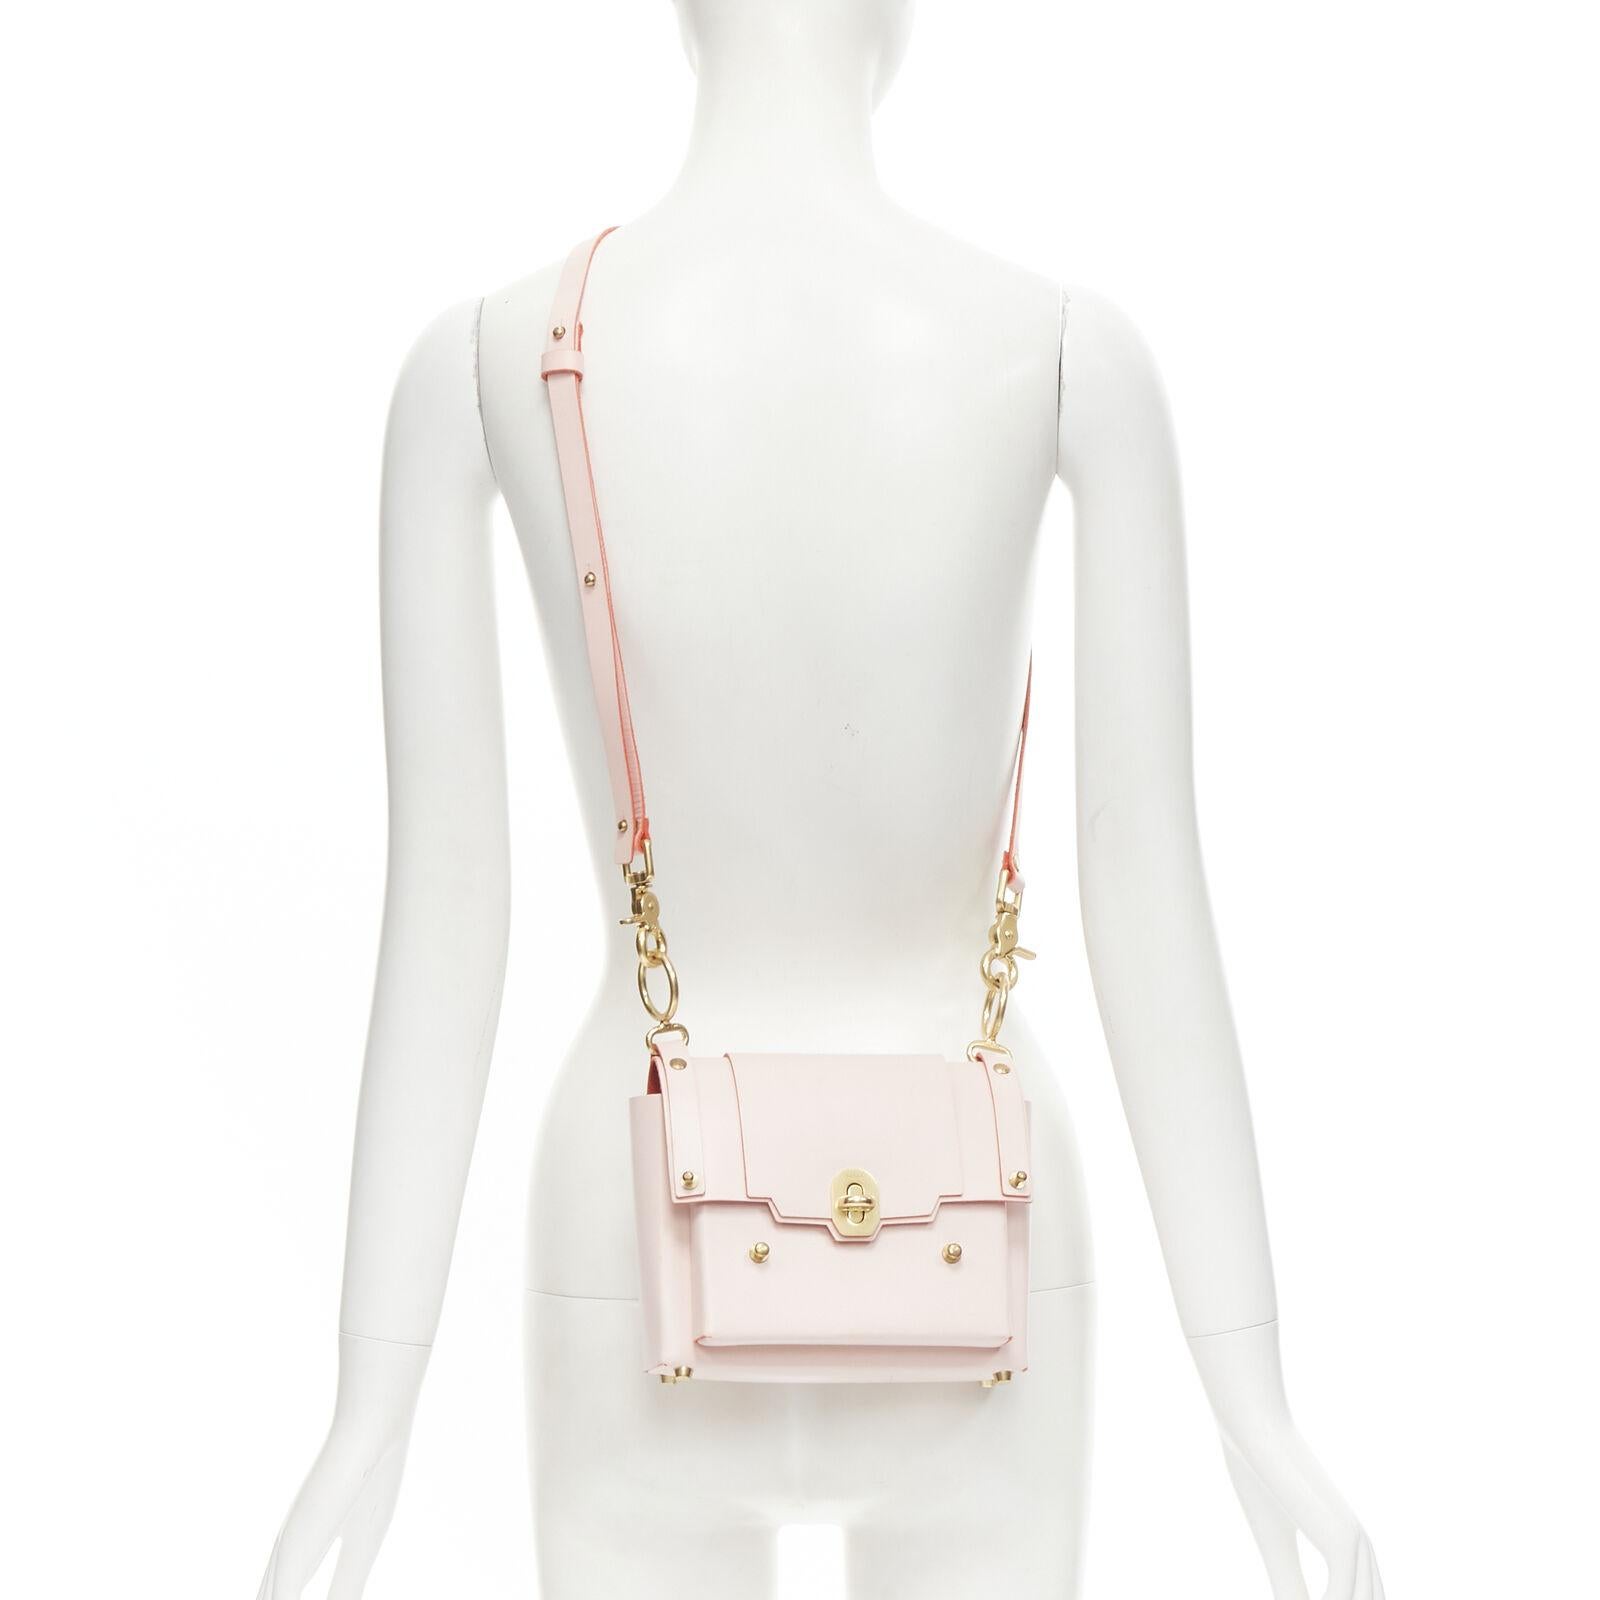 NIELS PEERAER Recycle pink Vegetable leather top handle half moon bag
Reference: KNCN/A00023
Brand: Niels Peeraer
Material: Leather
Color: Pink
Pattern: Solid
Closure: Turnlock
Extra Details: Vegetable tan leather. Gold-tone hardware. O-ring with